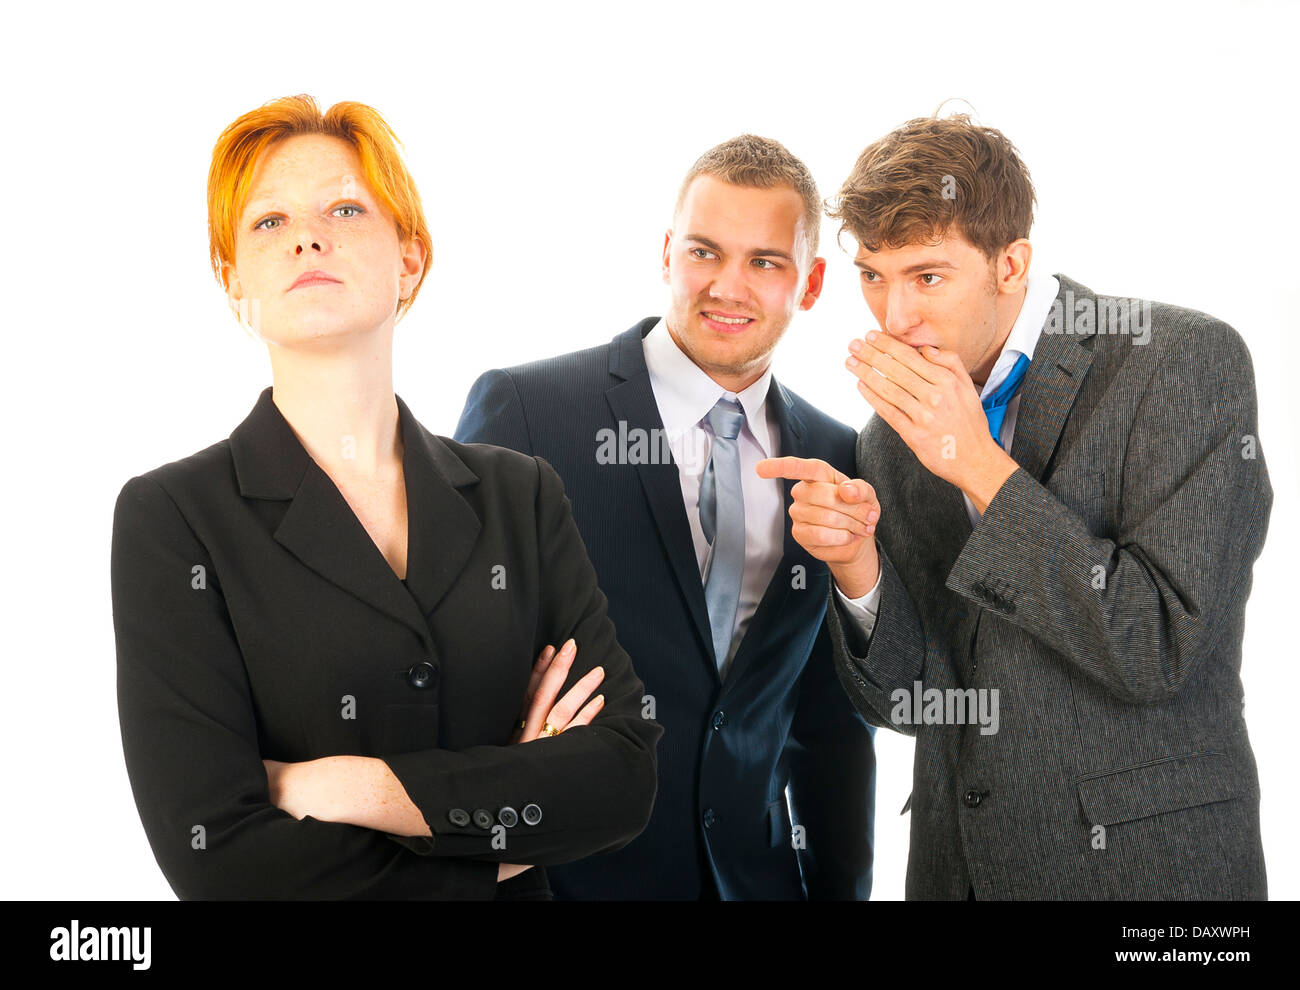 two men are whispering behind the back of a colleague Stock Photo